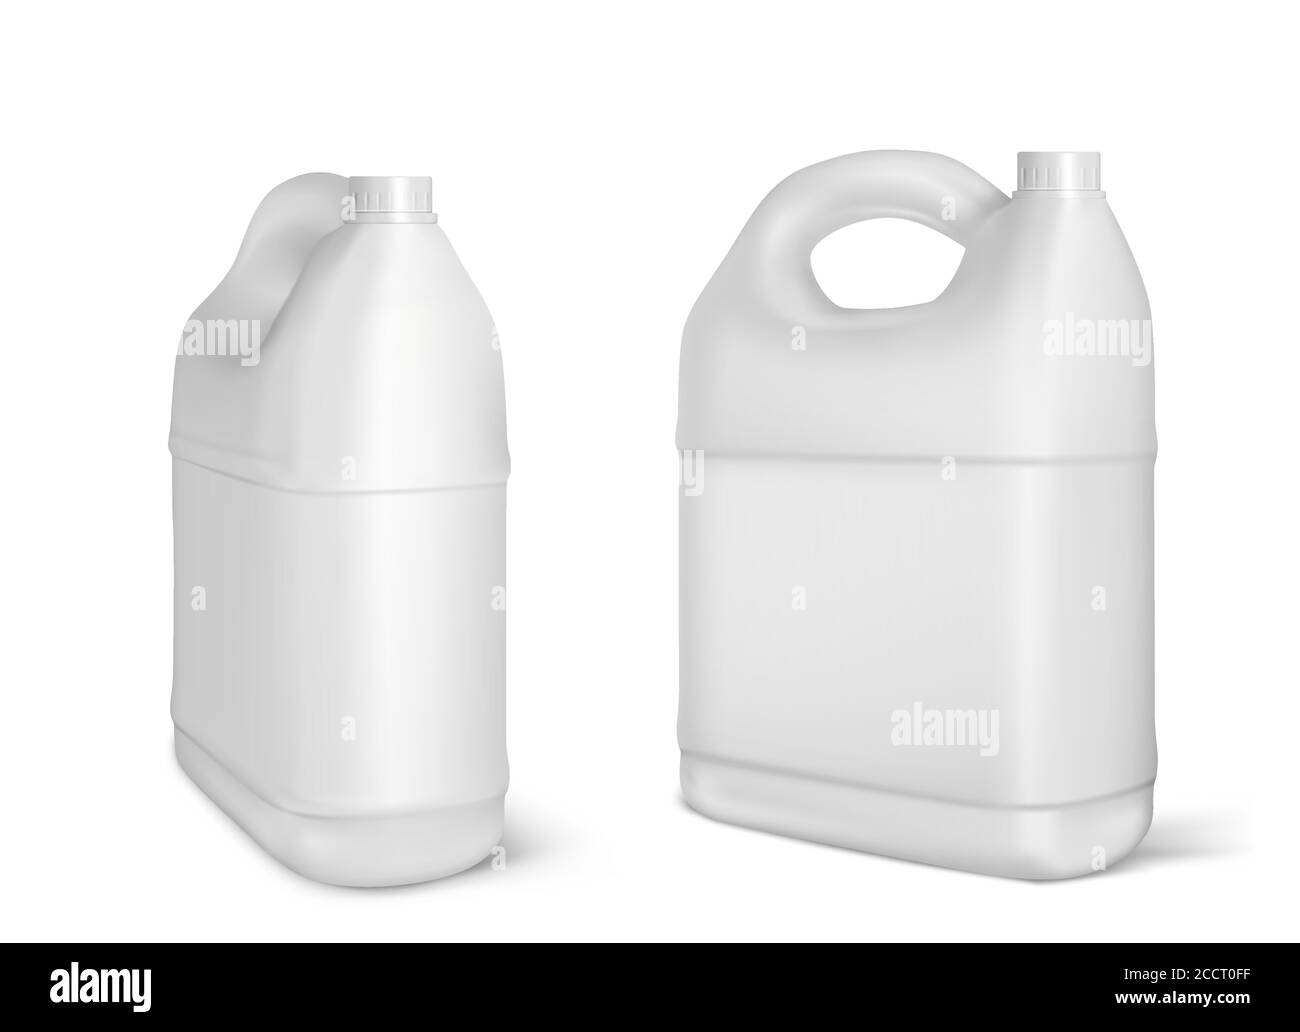 Download Plastic Canisters White Jerrycan Bottles Isolated On White Background Engine Oil Car Lubricant Or Gasoline Additive Blank Container Detergent Product Design Element Realistic 3d Vector Mockup Stock Vector Image Art